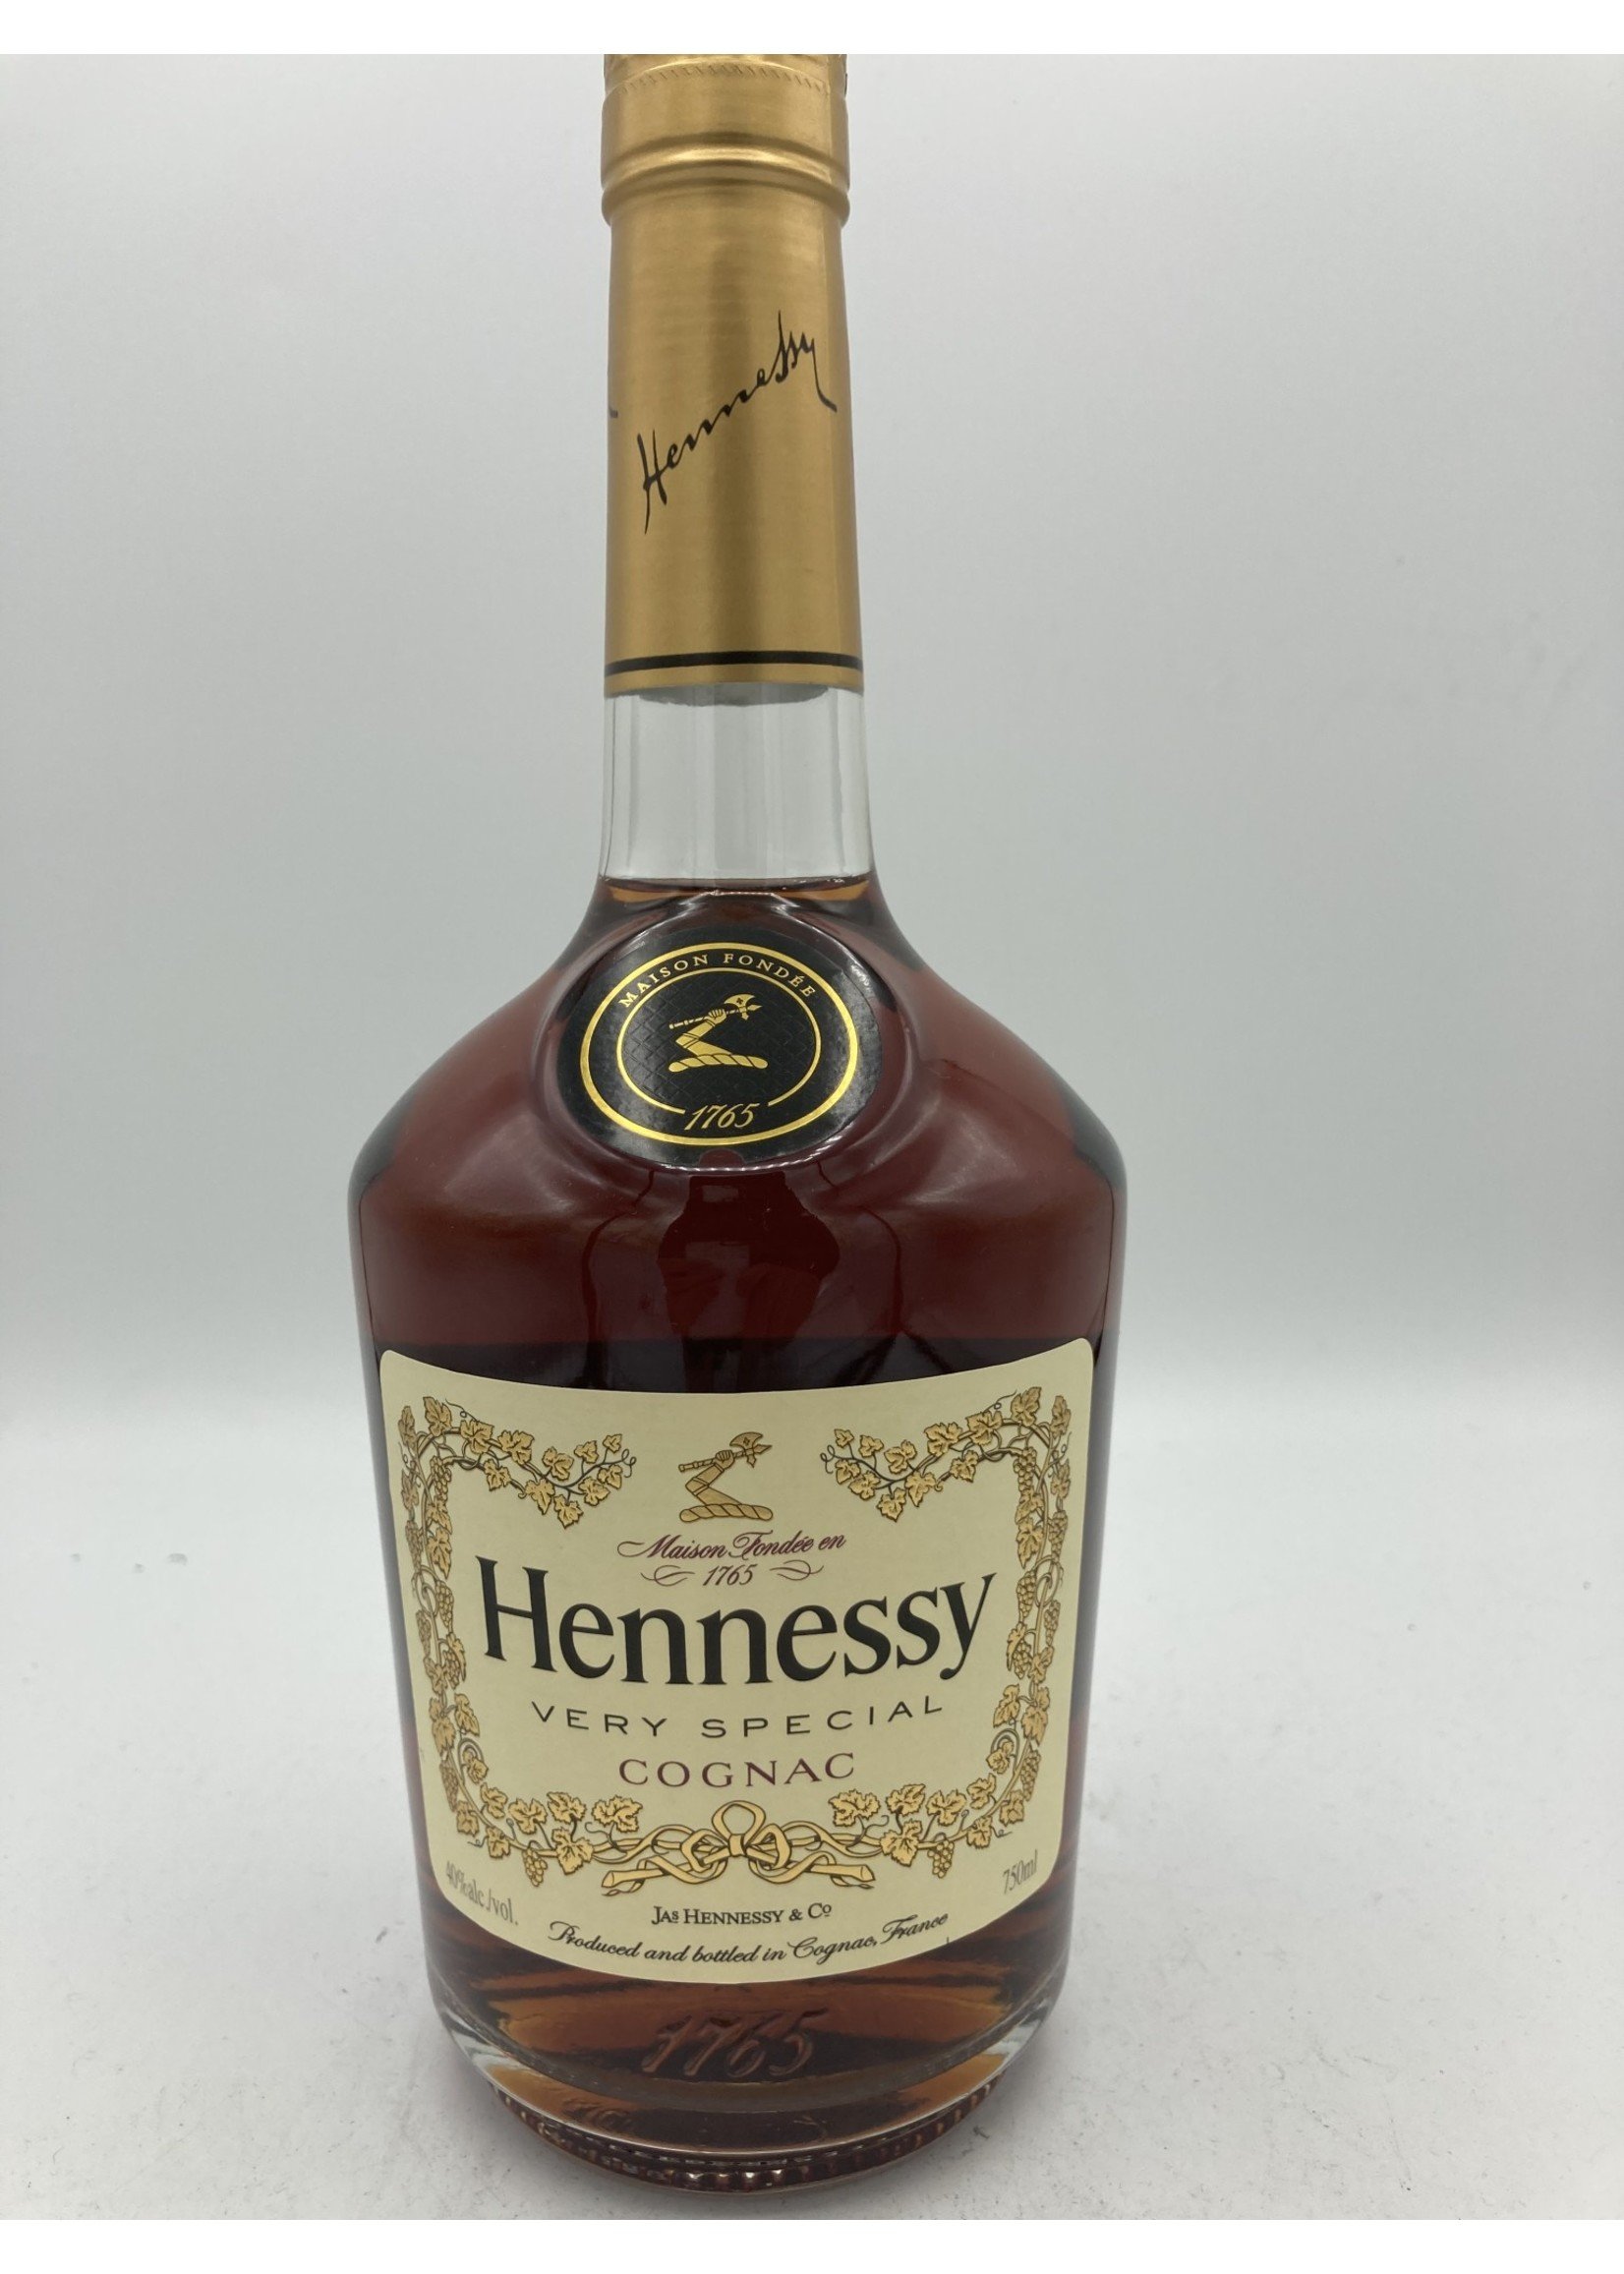 Hennessy cognac very special proof 80 - Holly 750ml liquor abv Main 40